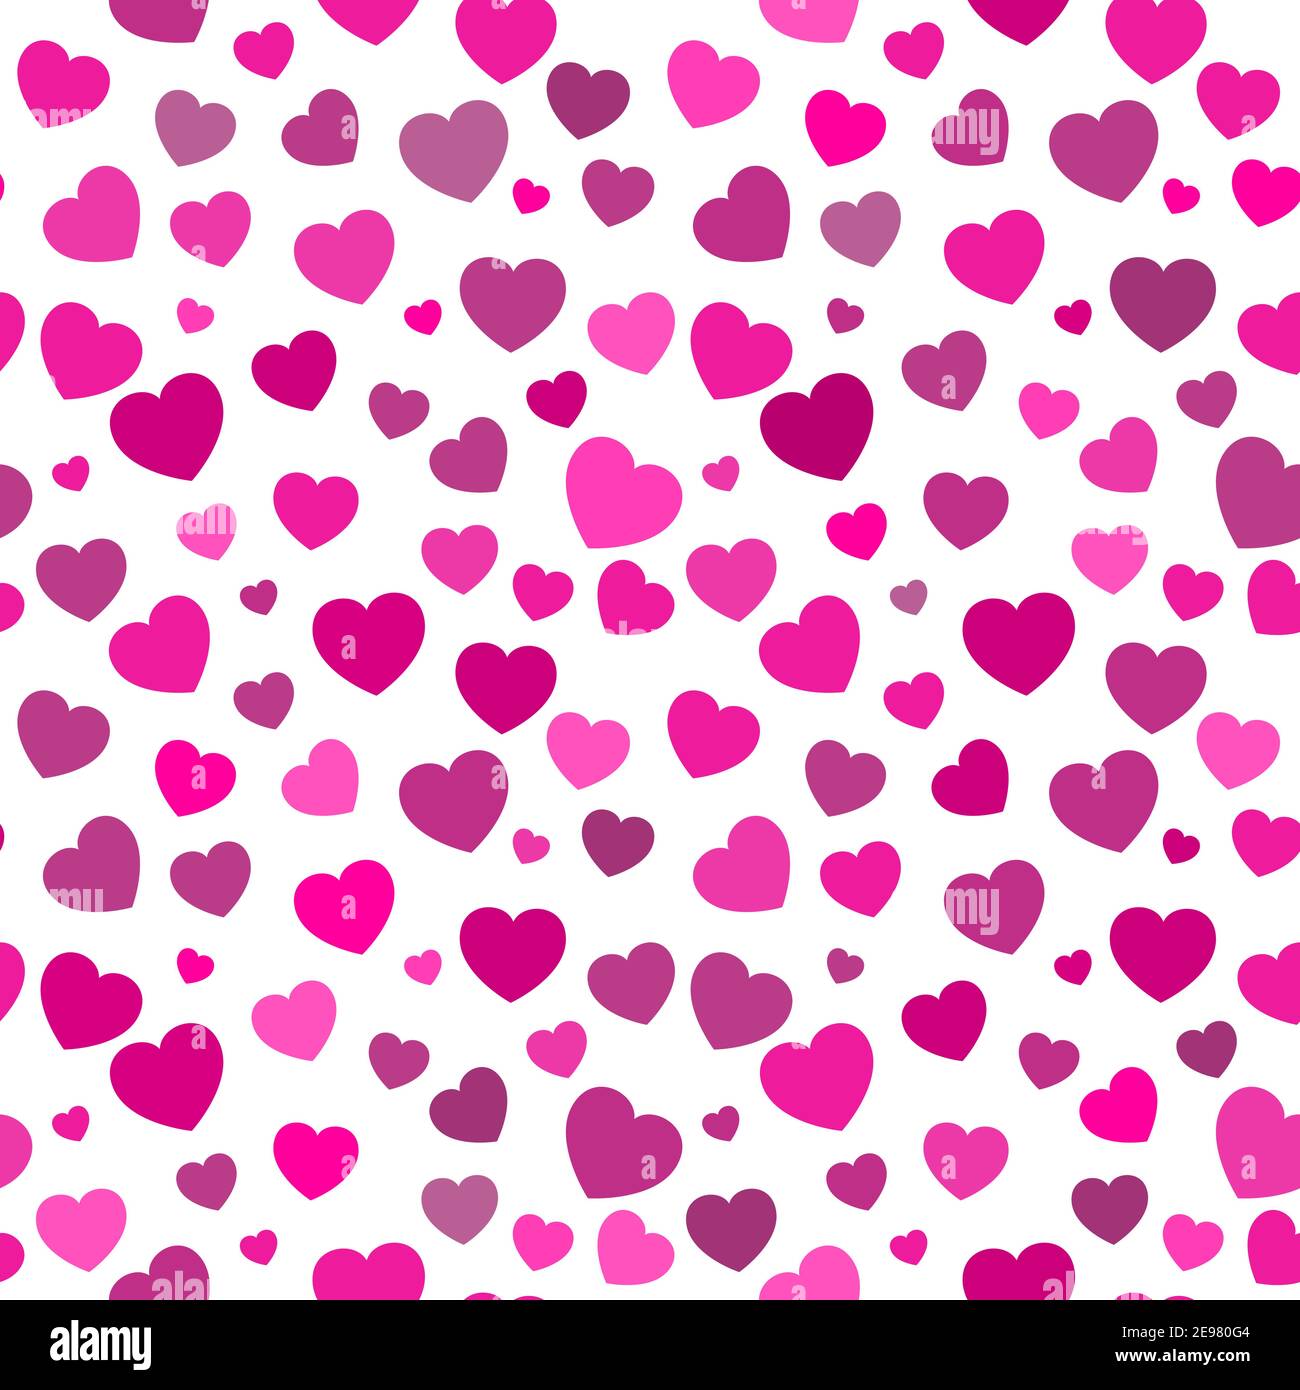 Heart seamless pattern. Pink love symbol wallpaper for valentine's day. Classic and simple vector background. Stock Vector